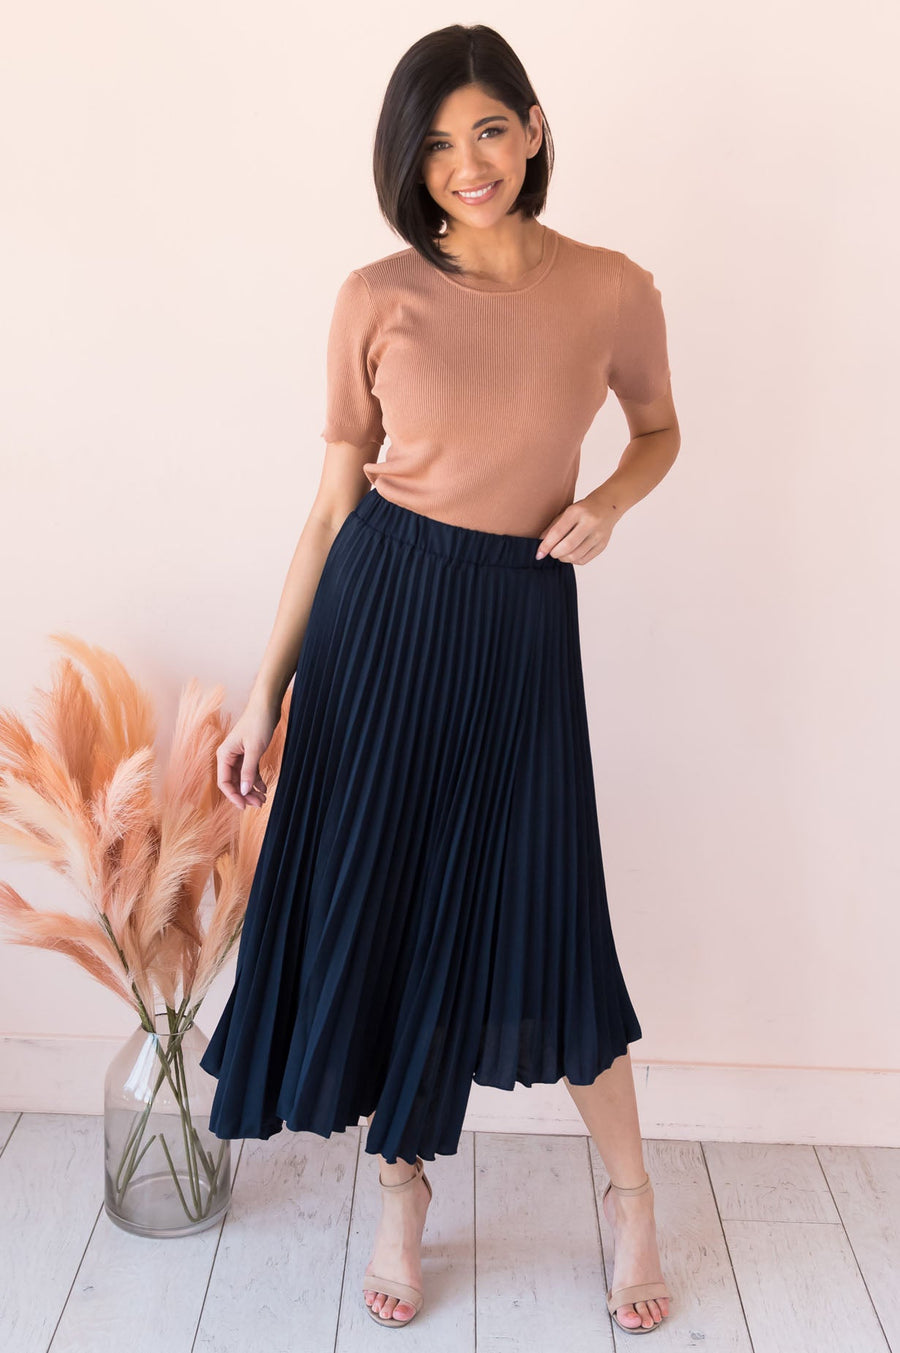 You Say I Am Loved Modest Pleat Skirt NeeSee's Dresses 